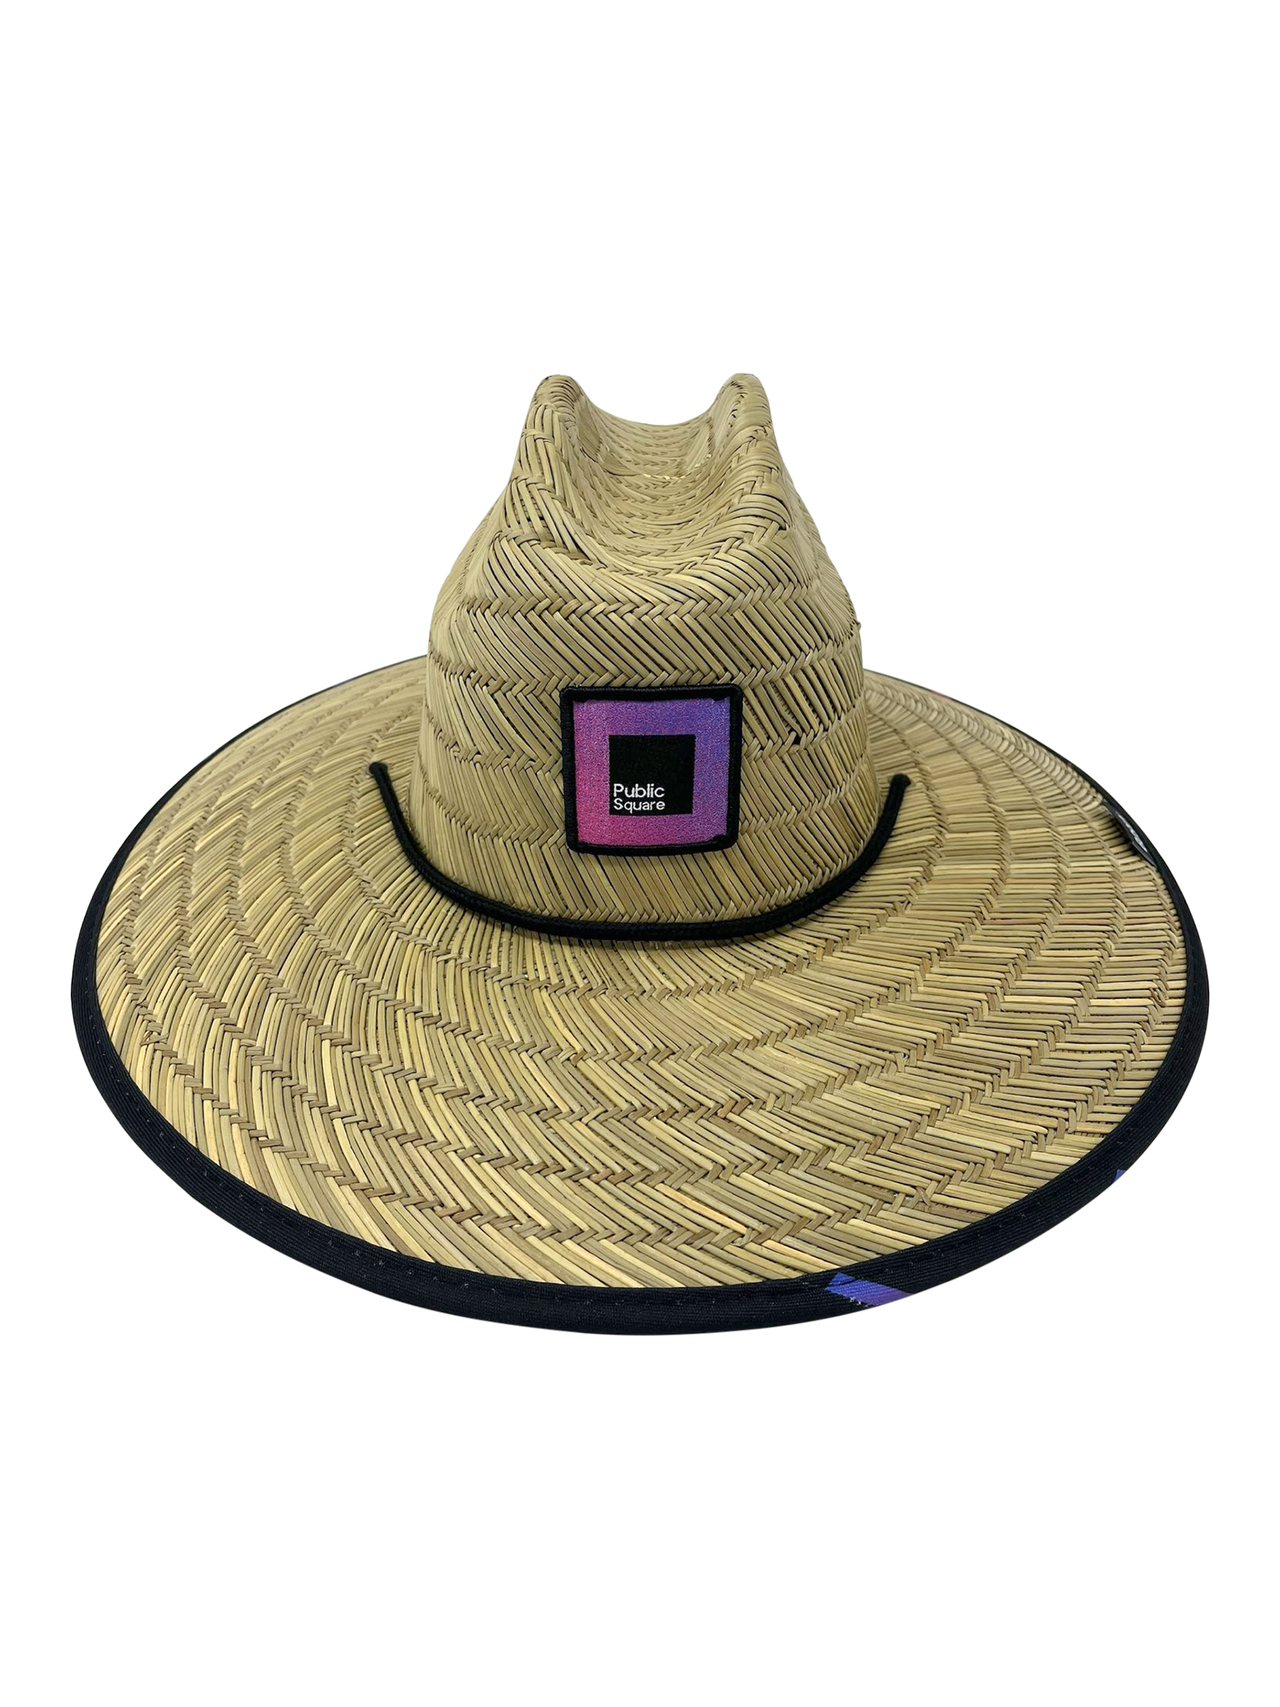 Official Public Square x Bosky Premium Straw Shade Summer Beach Hat